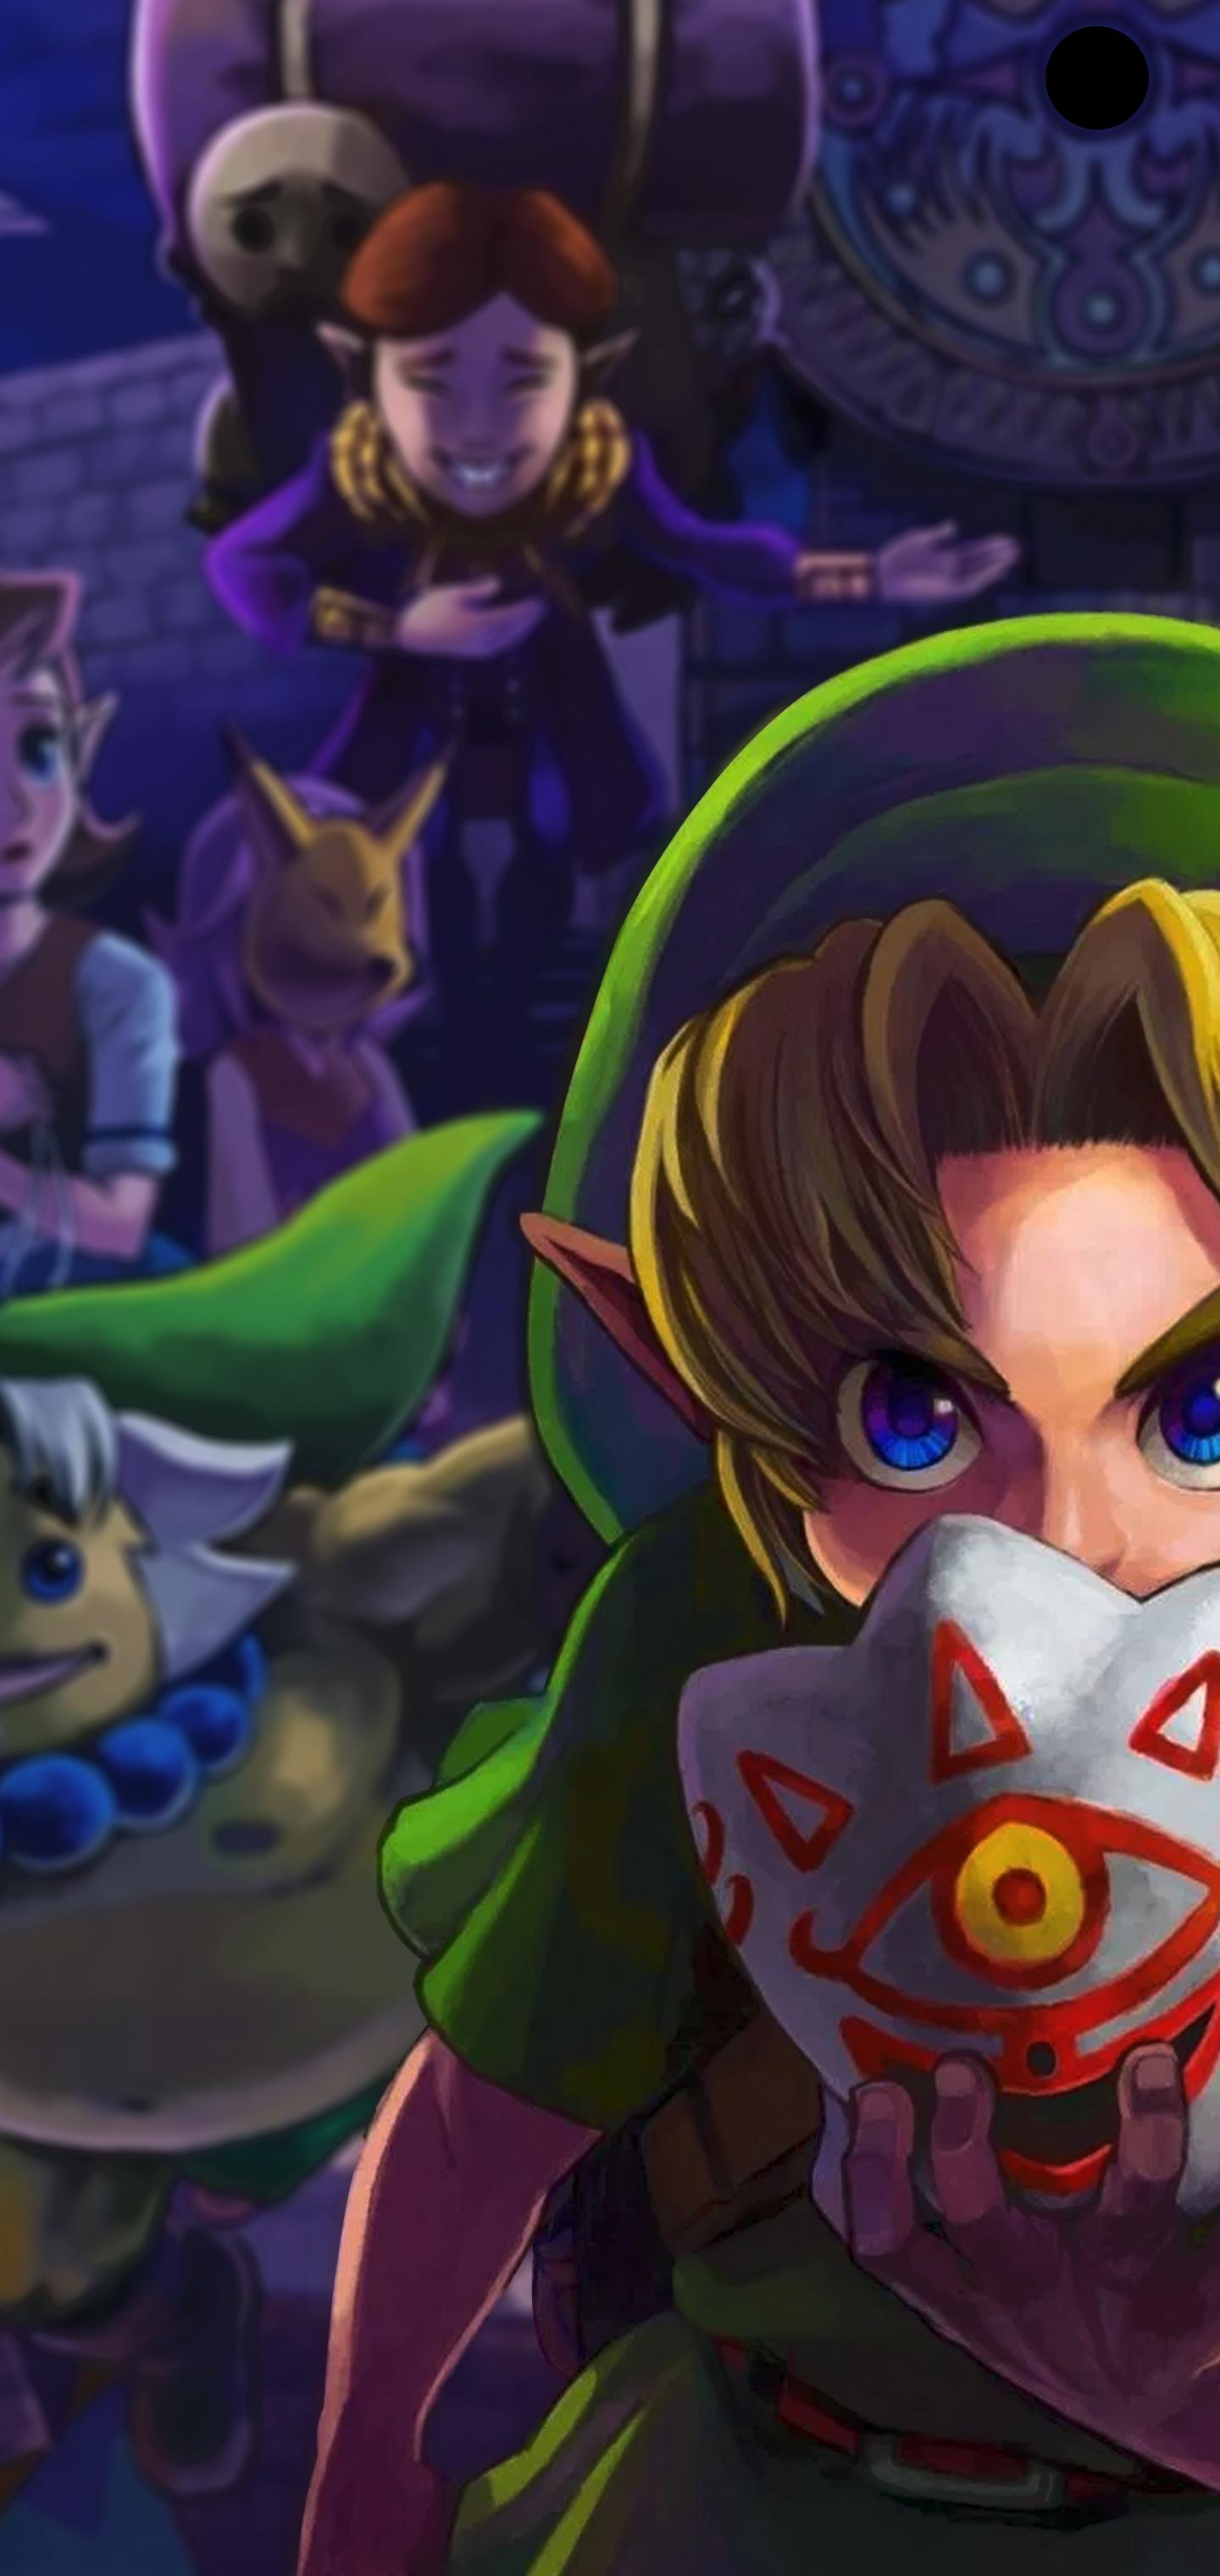 Galaxy S10 And S10e Wallpaper Of Link And Others From - Iphone 7 Wallpaper Hd Zelda - HD Wallpaper 